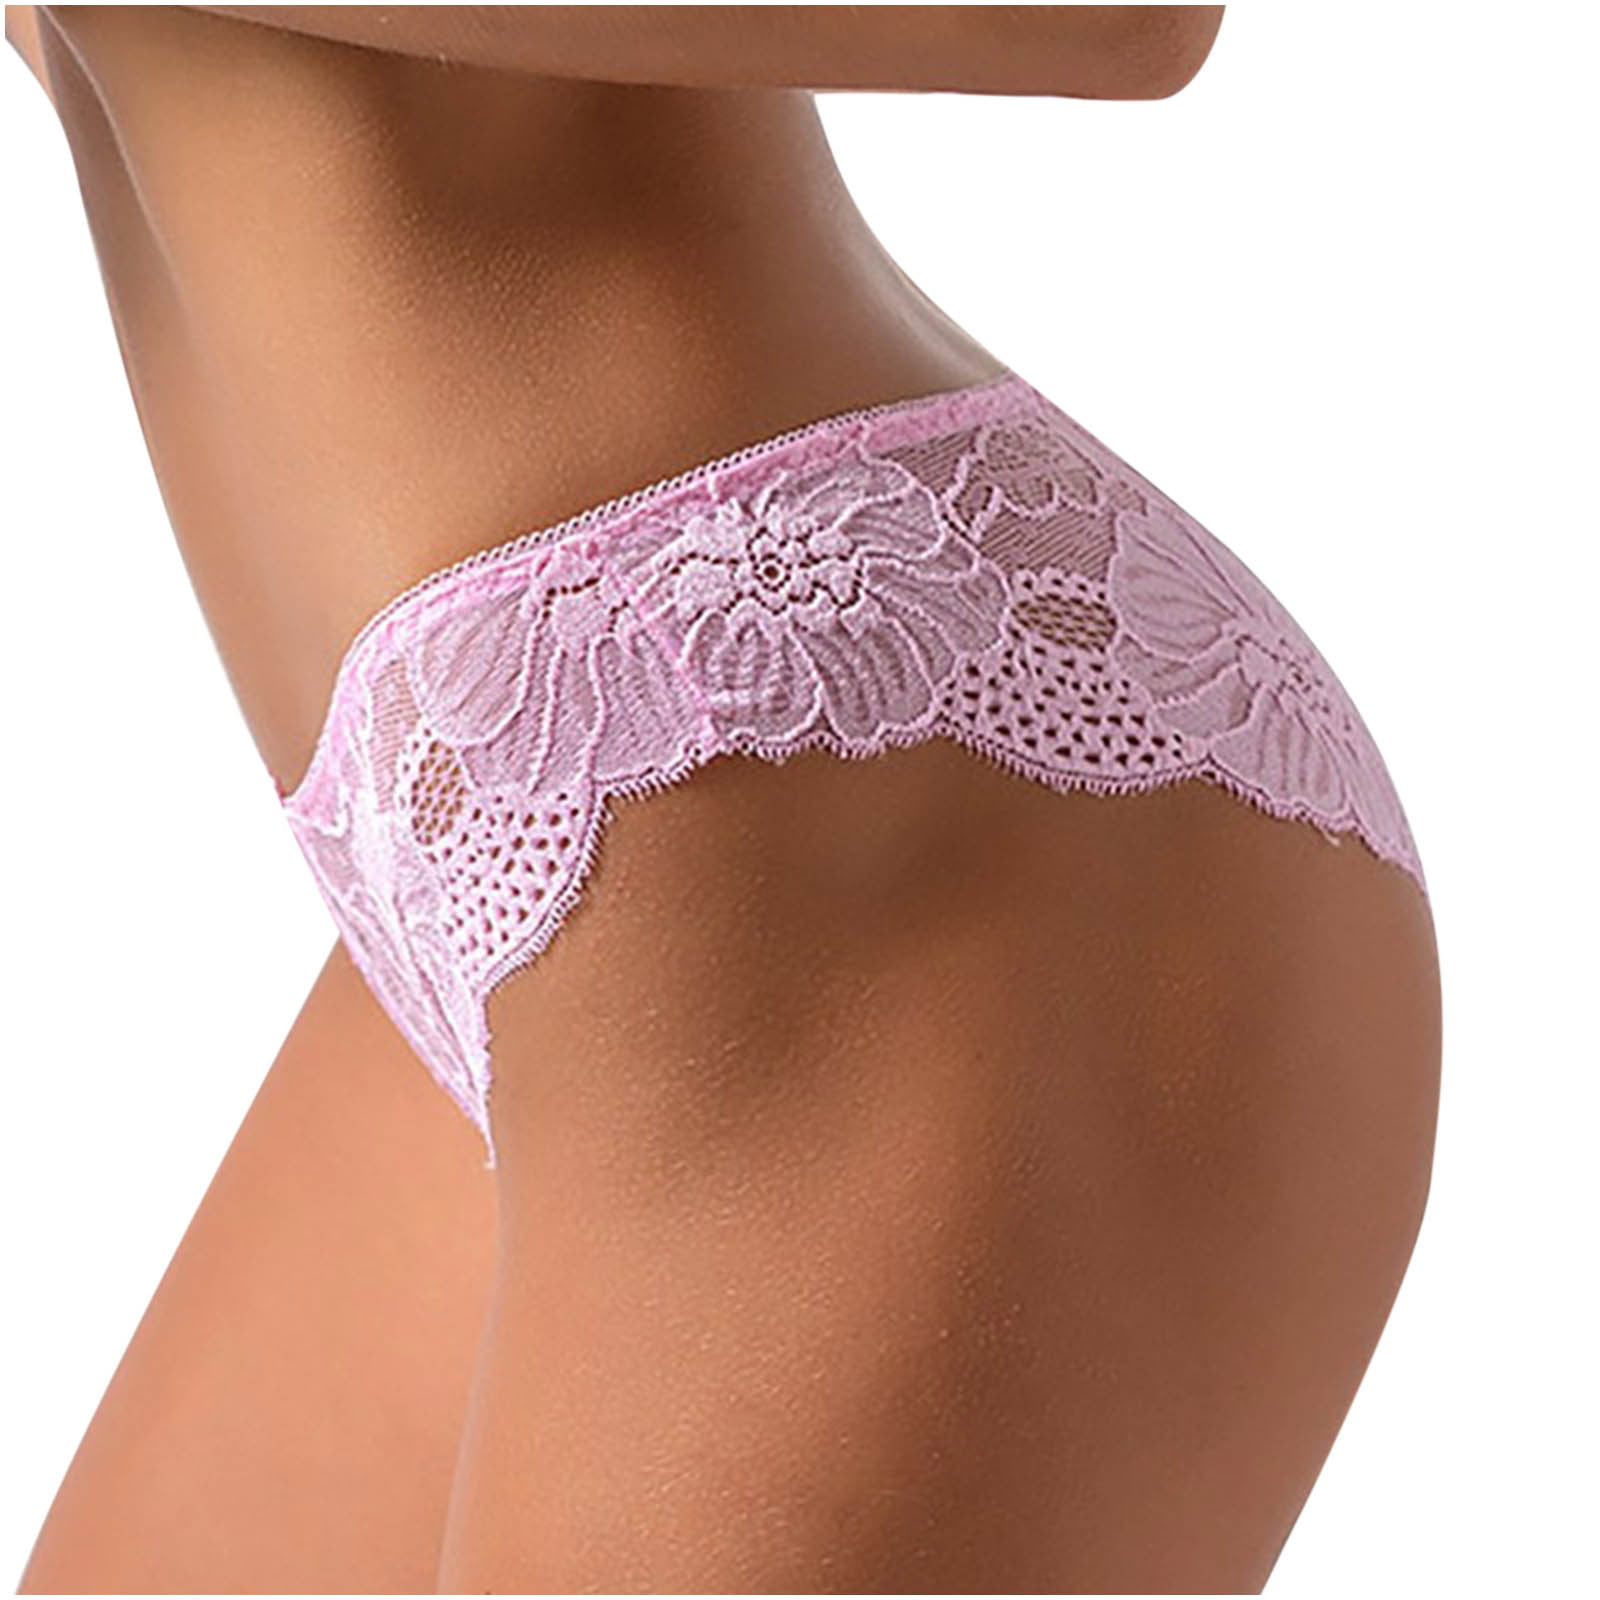 Buy Standard Quality China Wholesale Exquisite Women's Lace Printed Panties  Comfortable Breathable Custom Mallow Embroidered Hipster Pantiespopular  $1.3 Direct from Factory at Shantou Zhenyao Garments Co., Ltd.